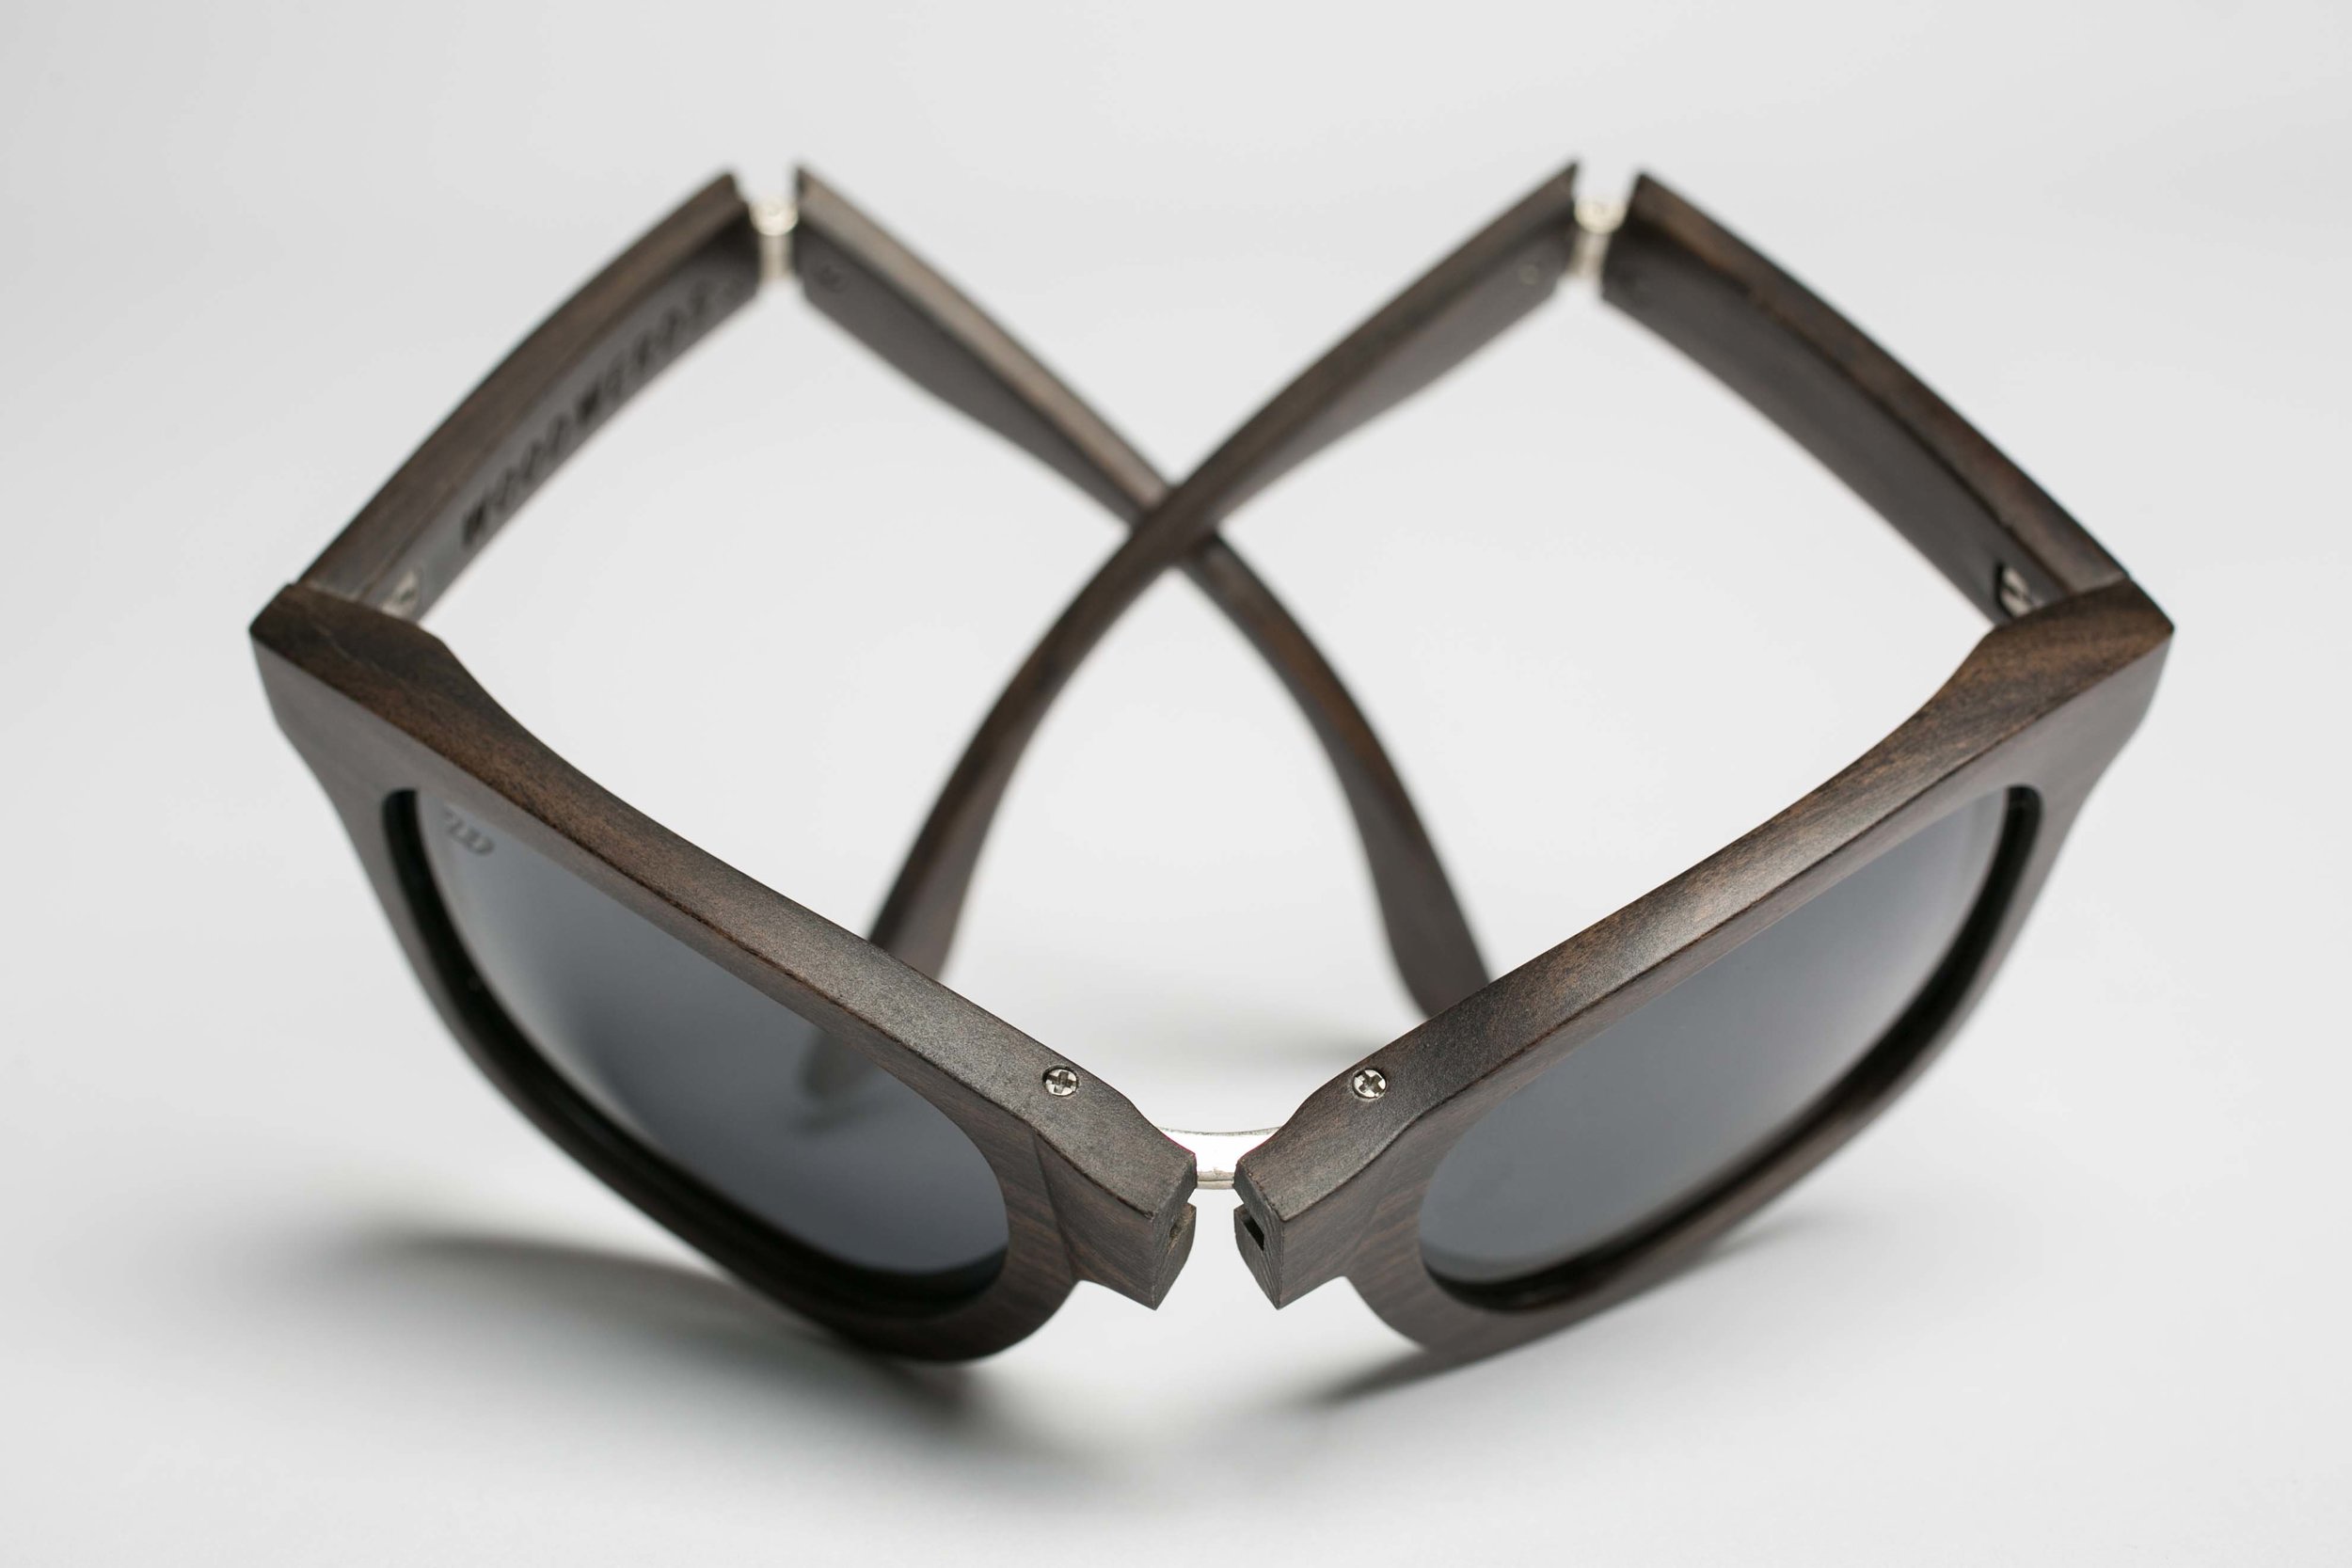  Woowerds Wooden sunglasses photographed by Dave Lamarand 